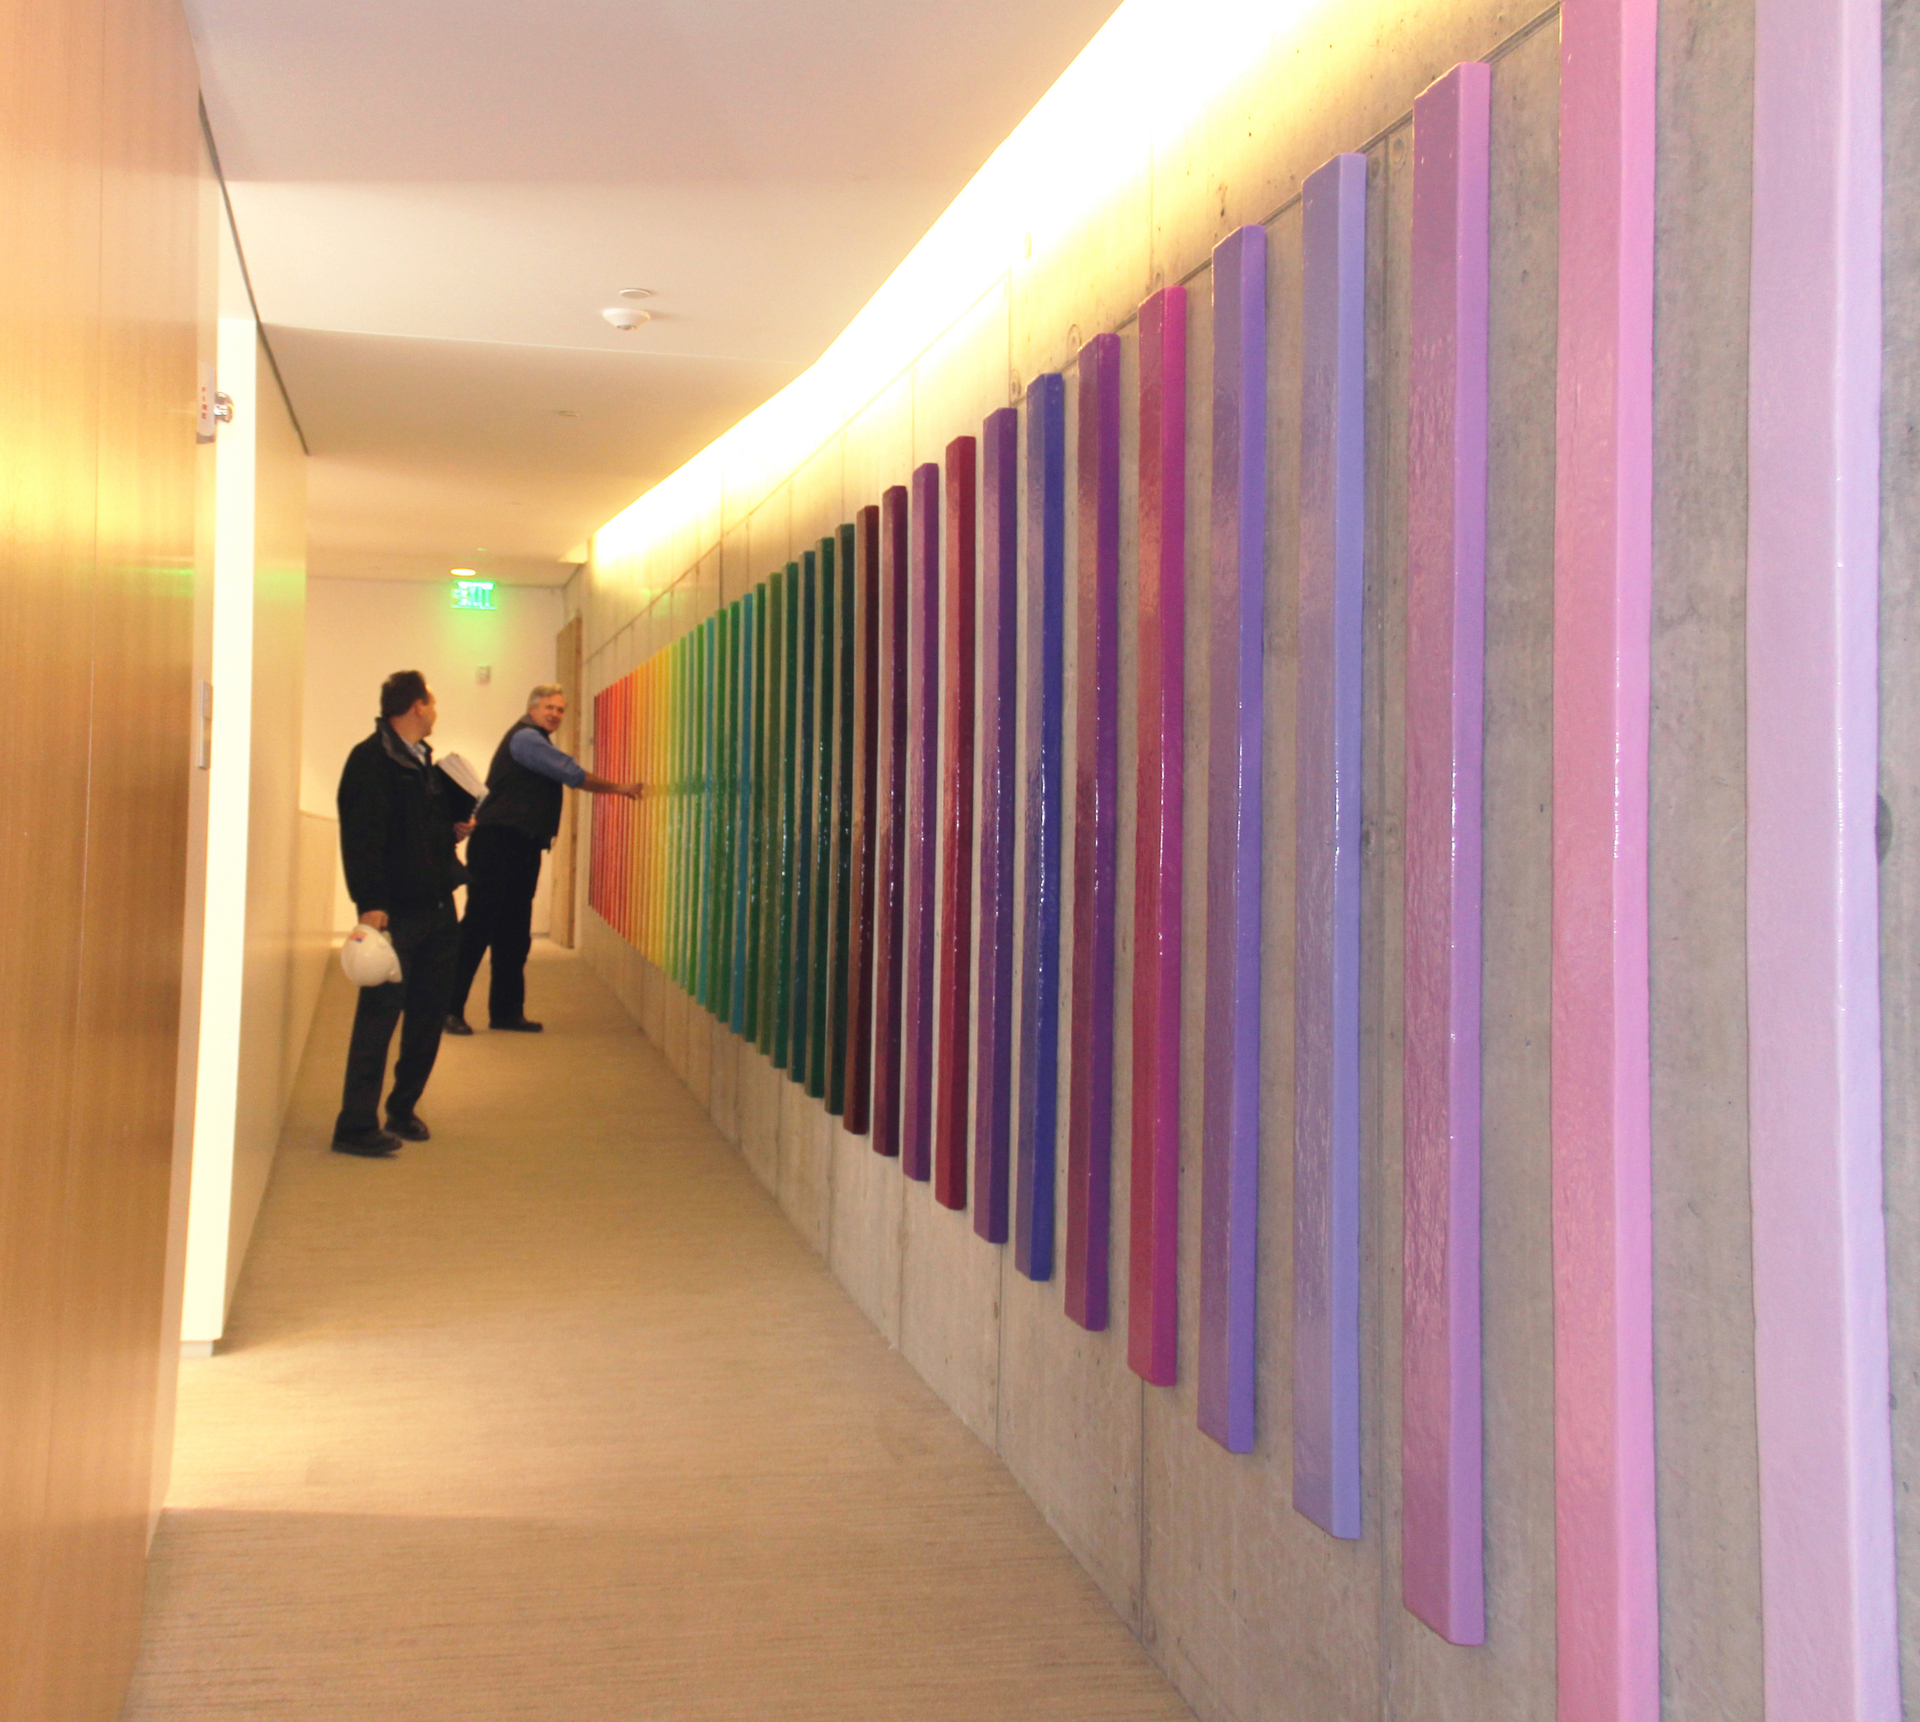 Photograph depicting a hallway with two people looking at a bluck art sculpture of multiple, colored panels hanging on the wall in rainbow order